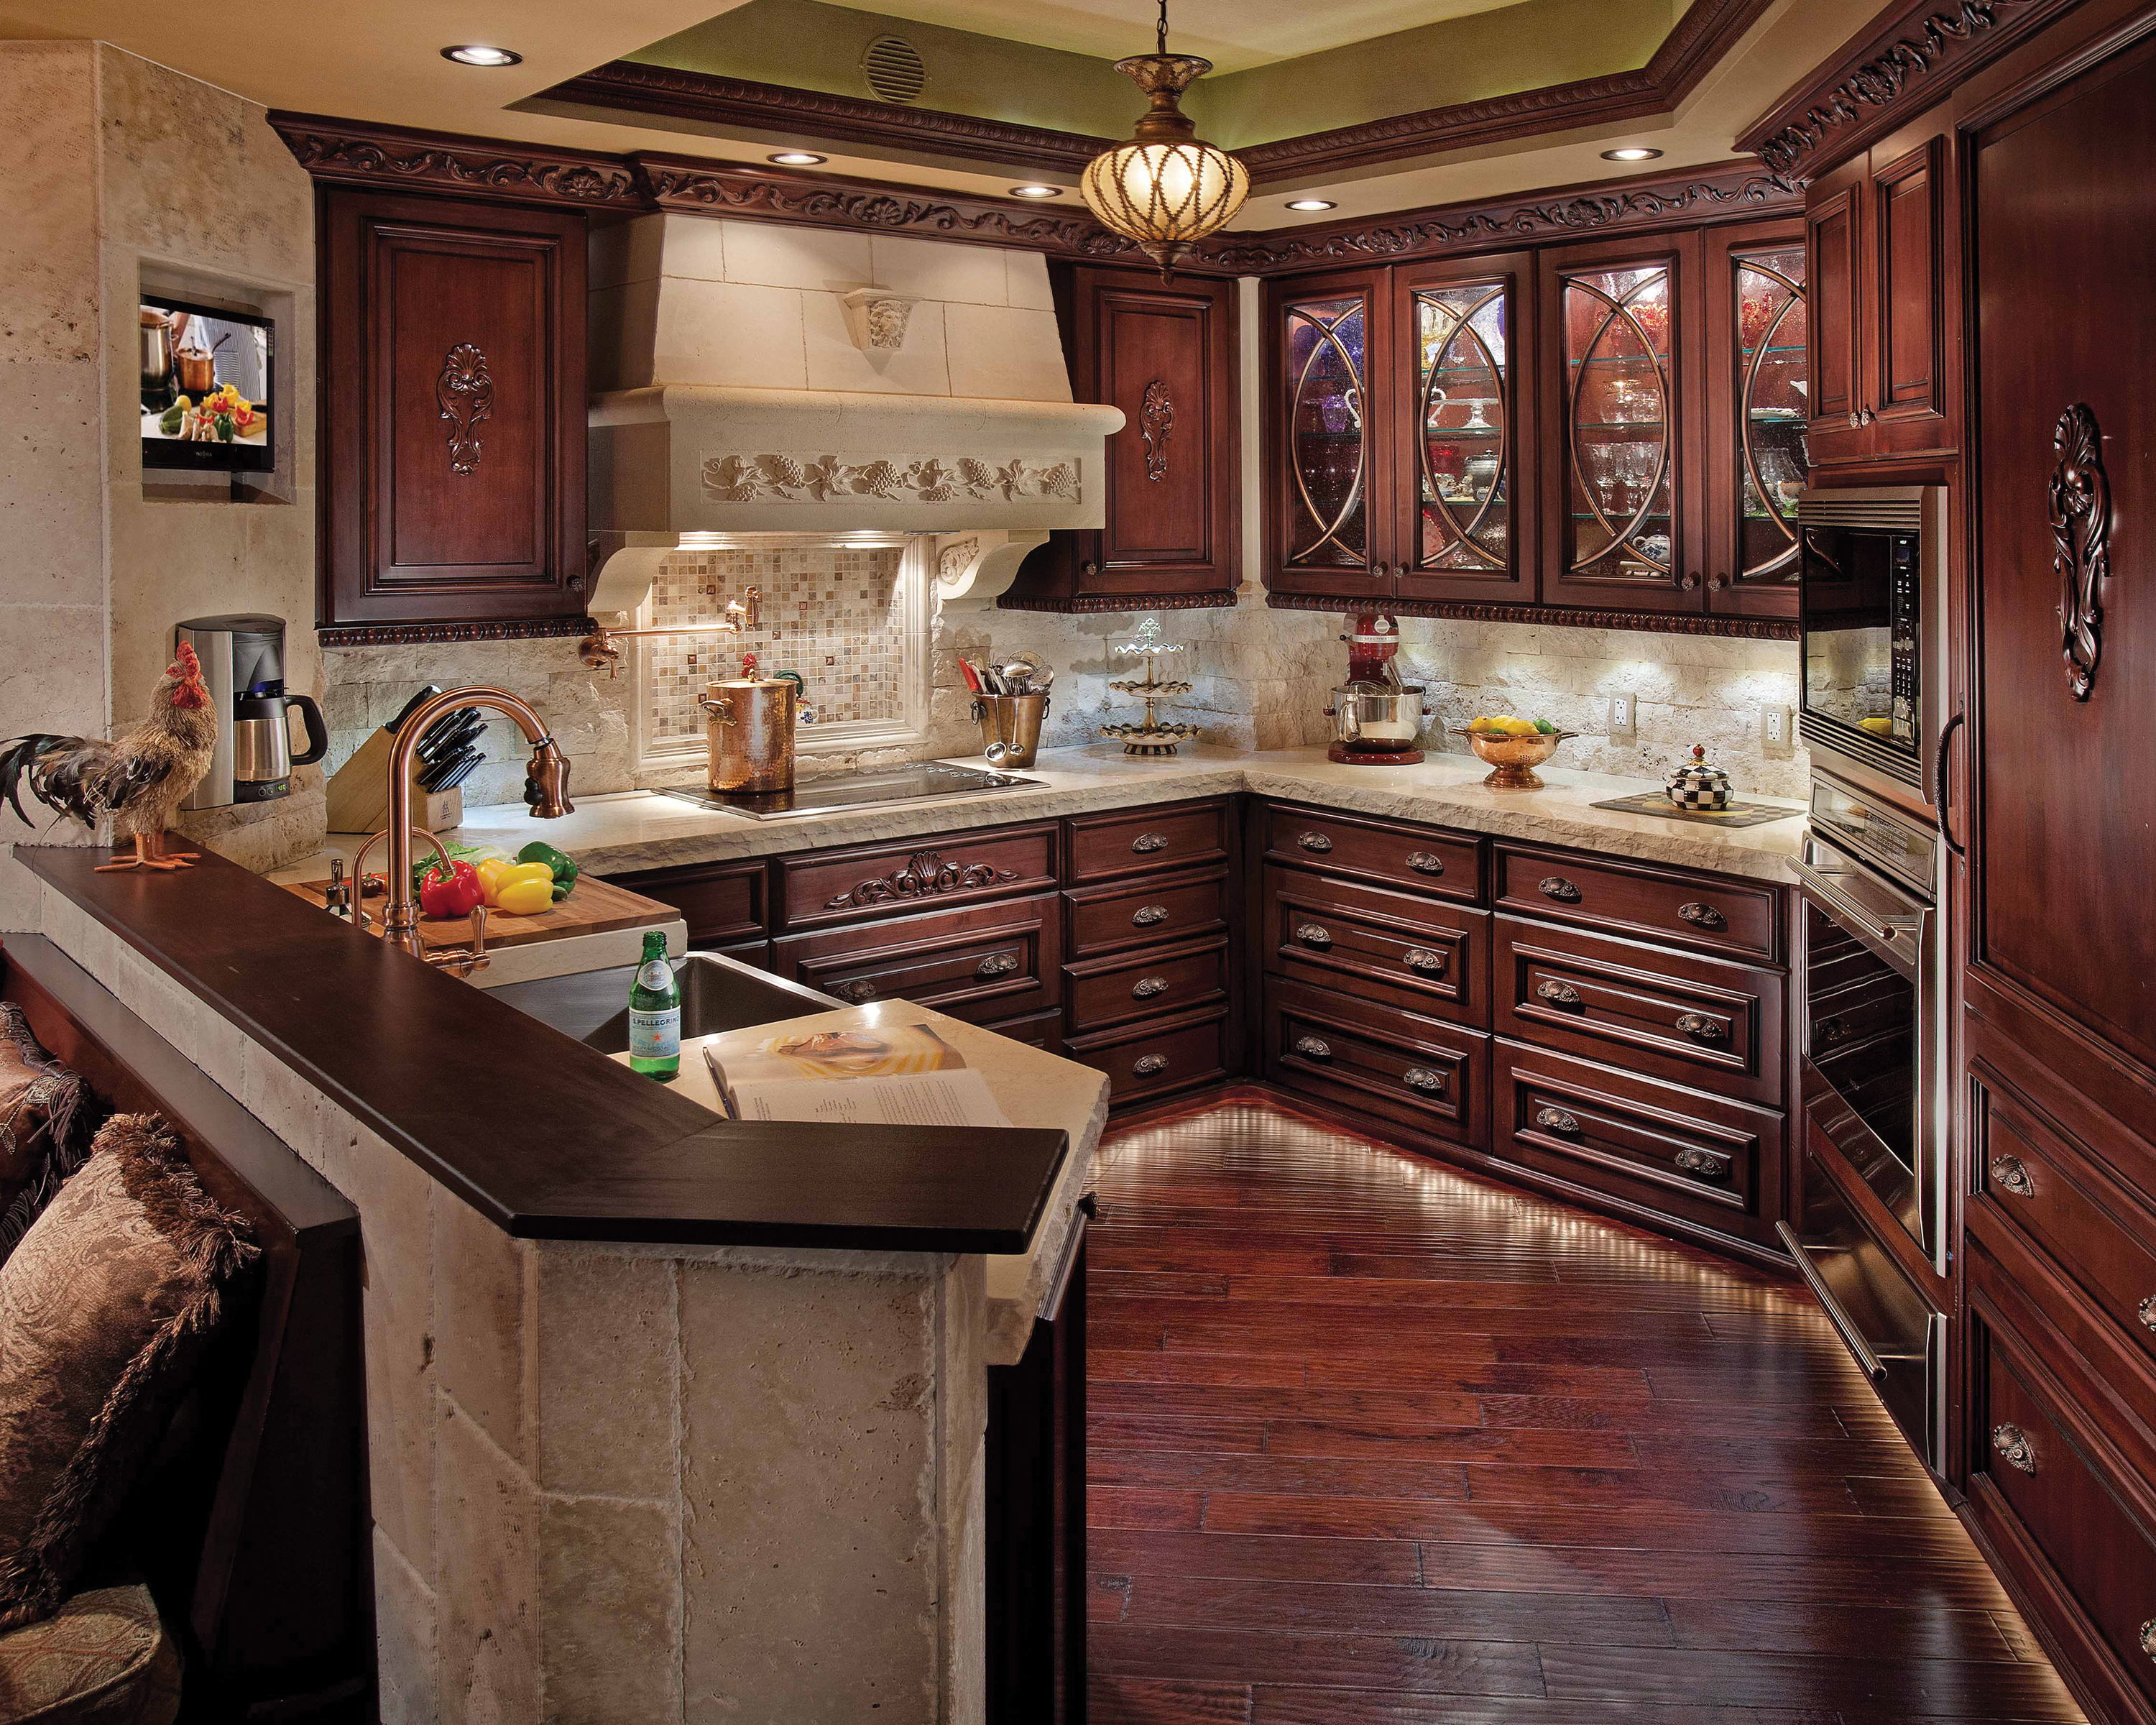 Cabinets have various shelf and drawer configurations that affect the amount of 